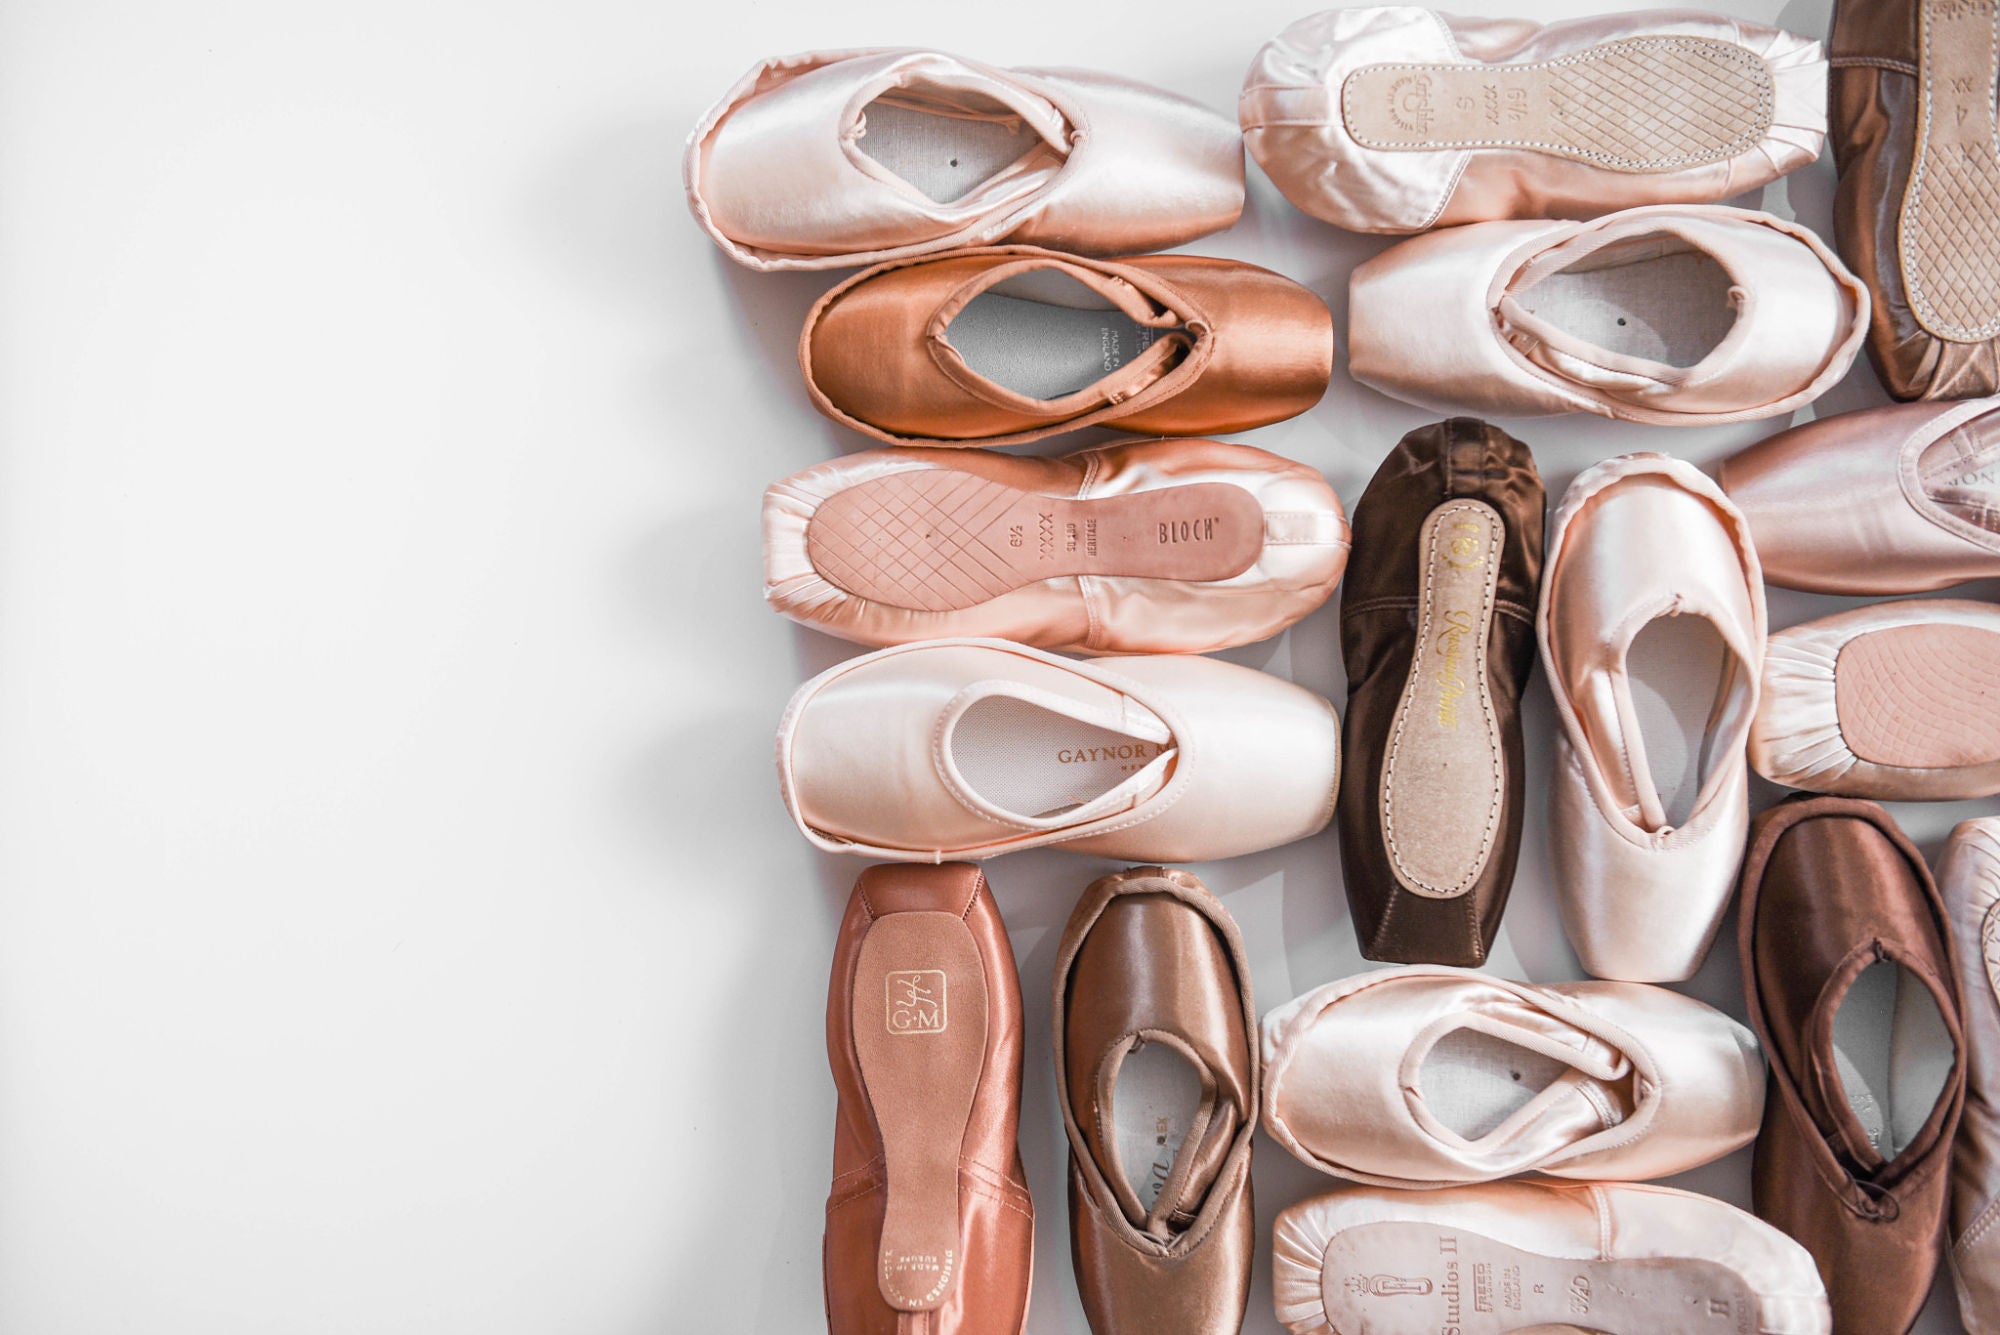 The Shoe Room at Canada's National Ballet School